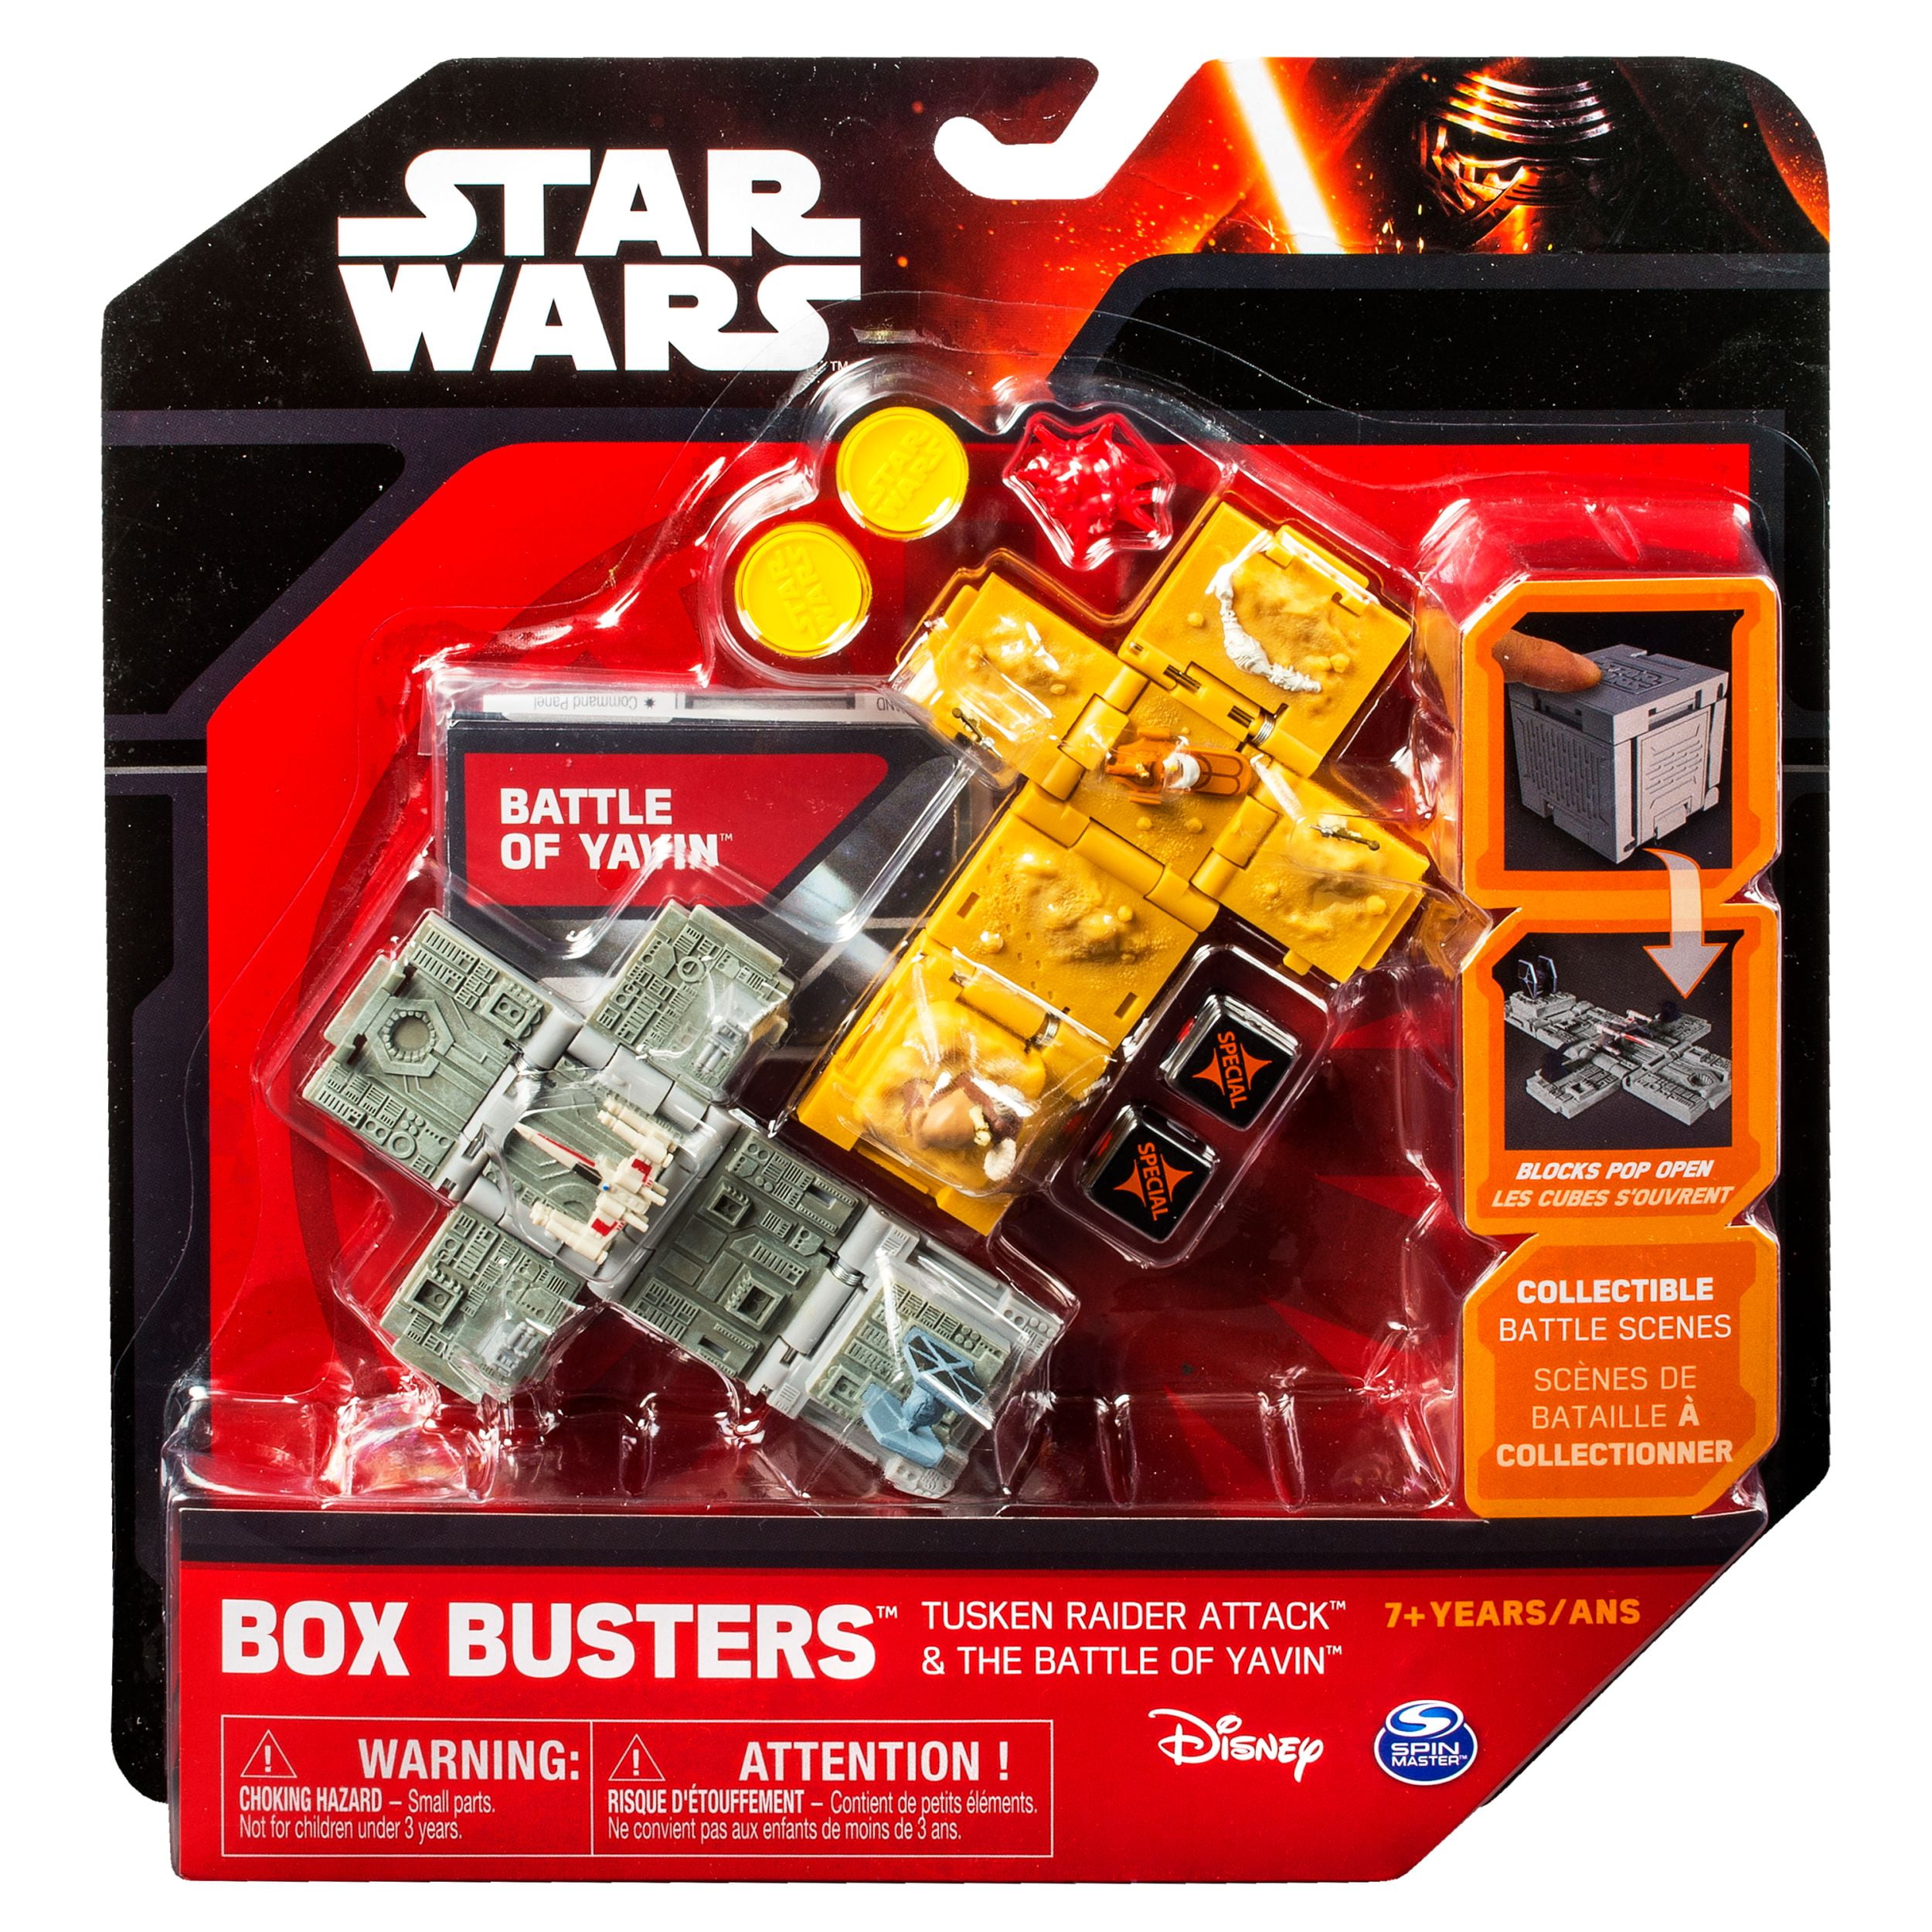 Details about   Lot of 2 Disney Star Wars Box Busters Battle of Hoth & Battle of Yavin New 